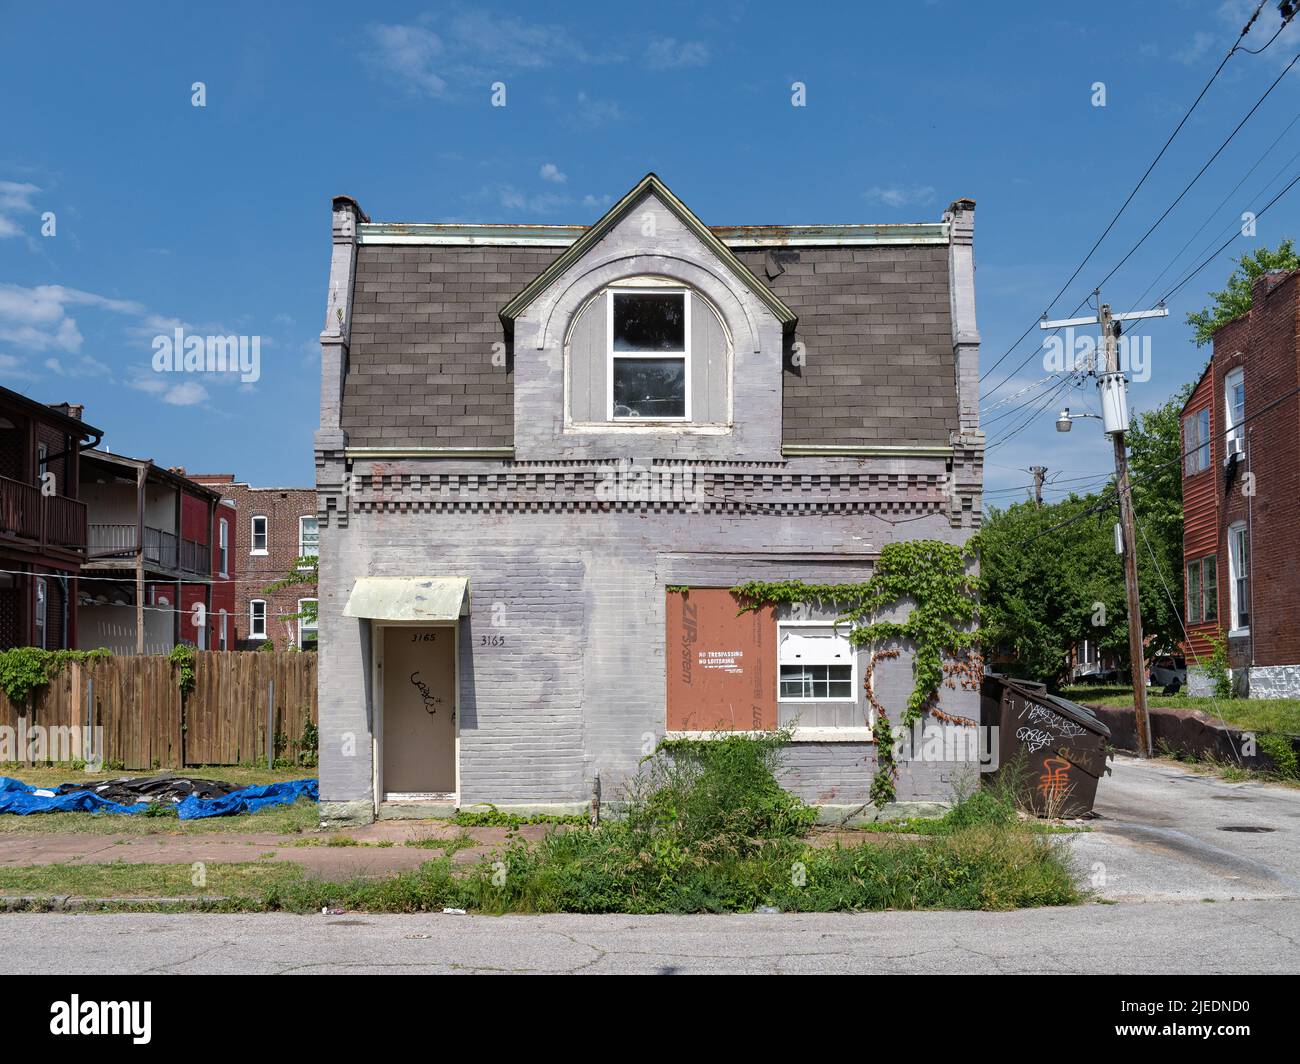 Residential buildings in St. Louis south city Stock Photo